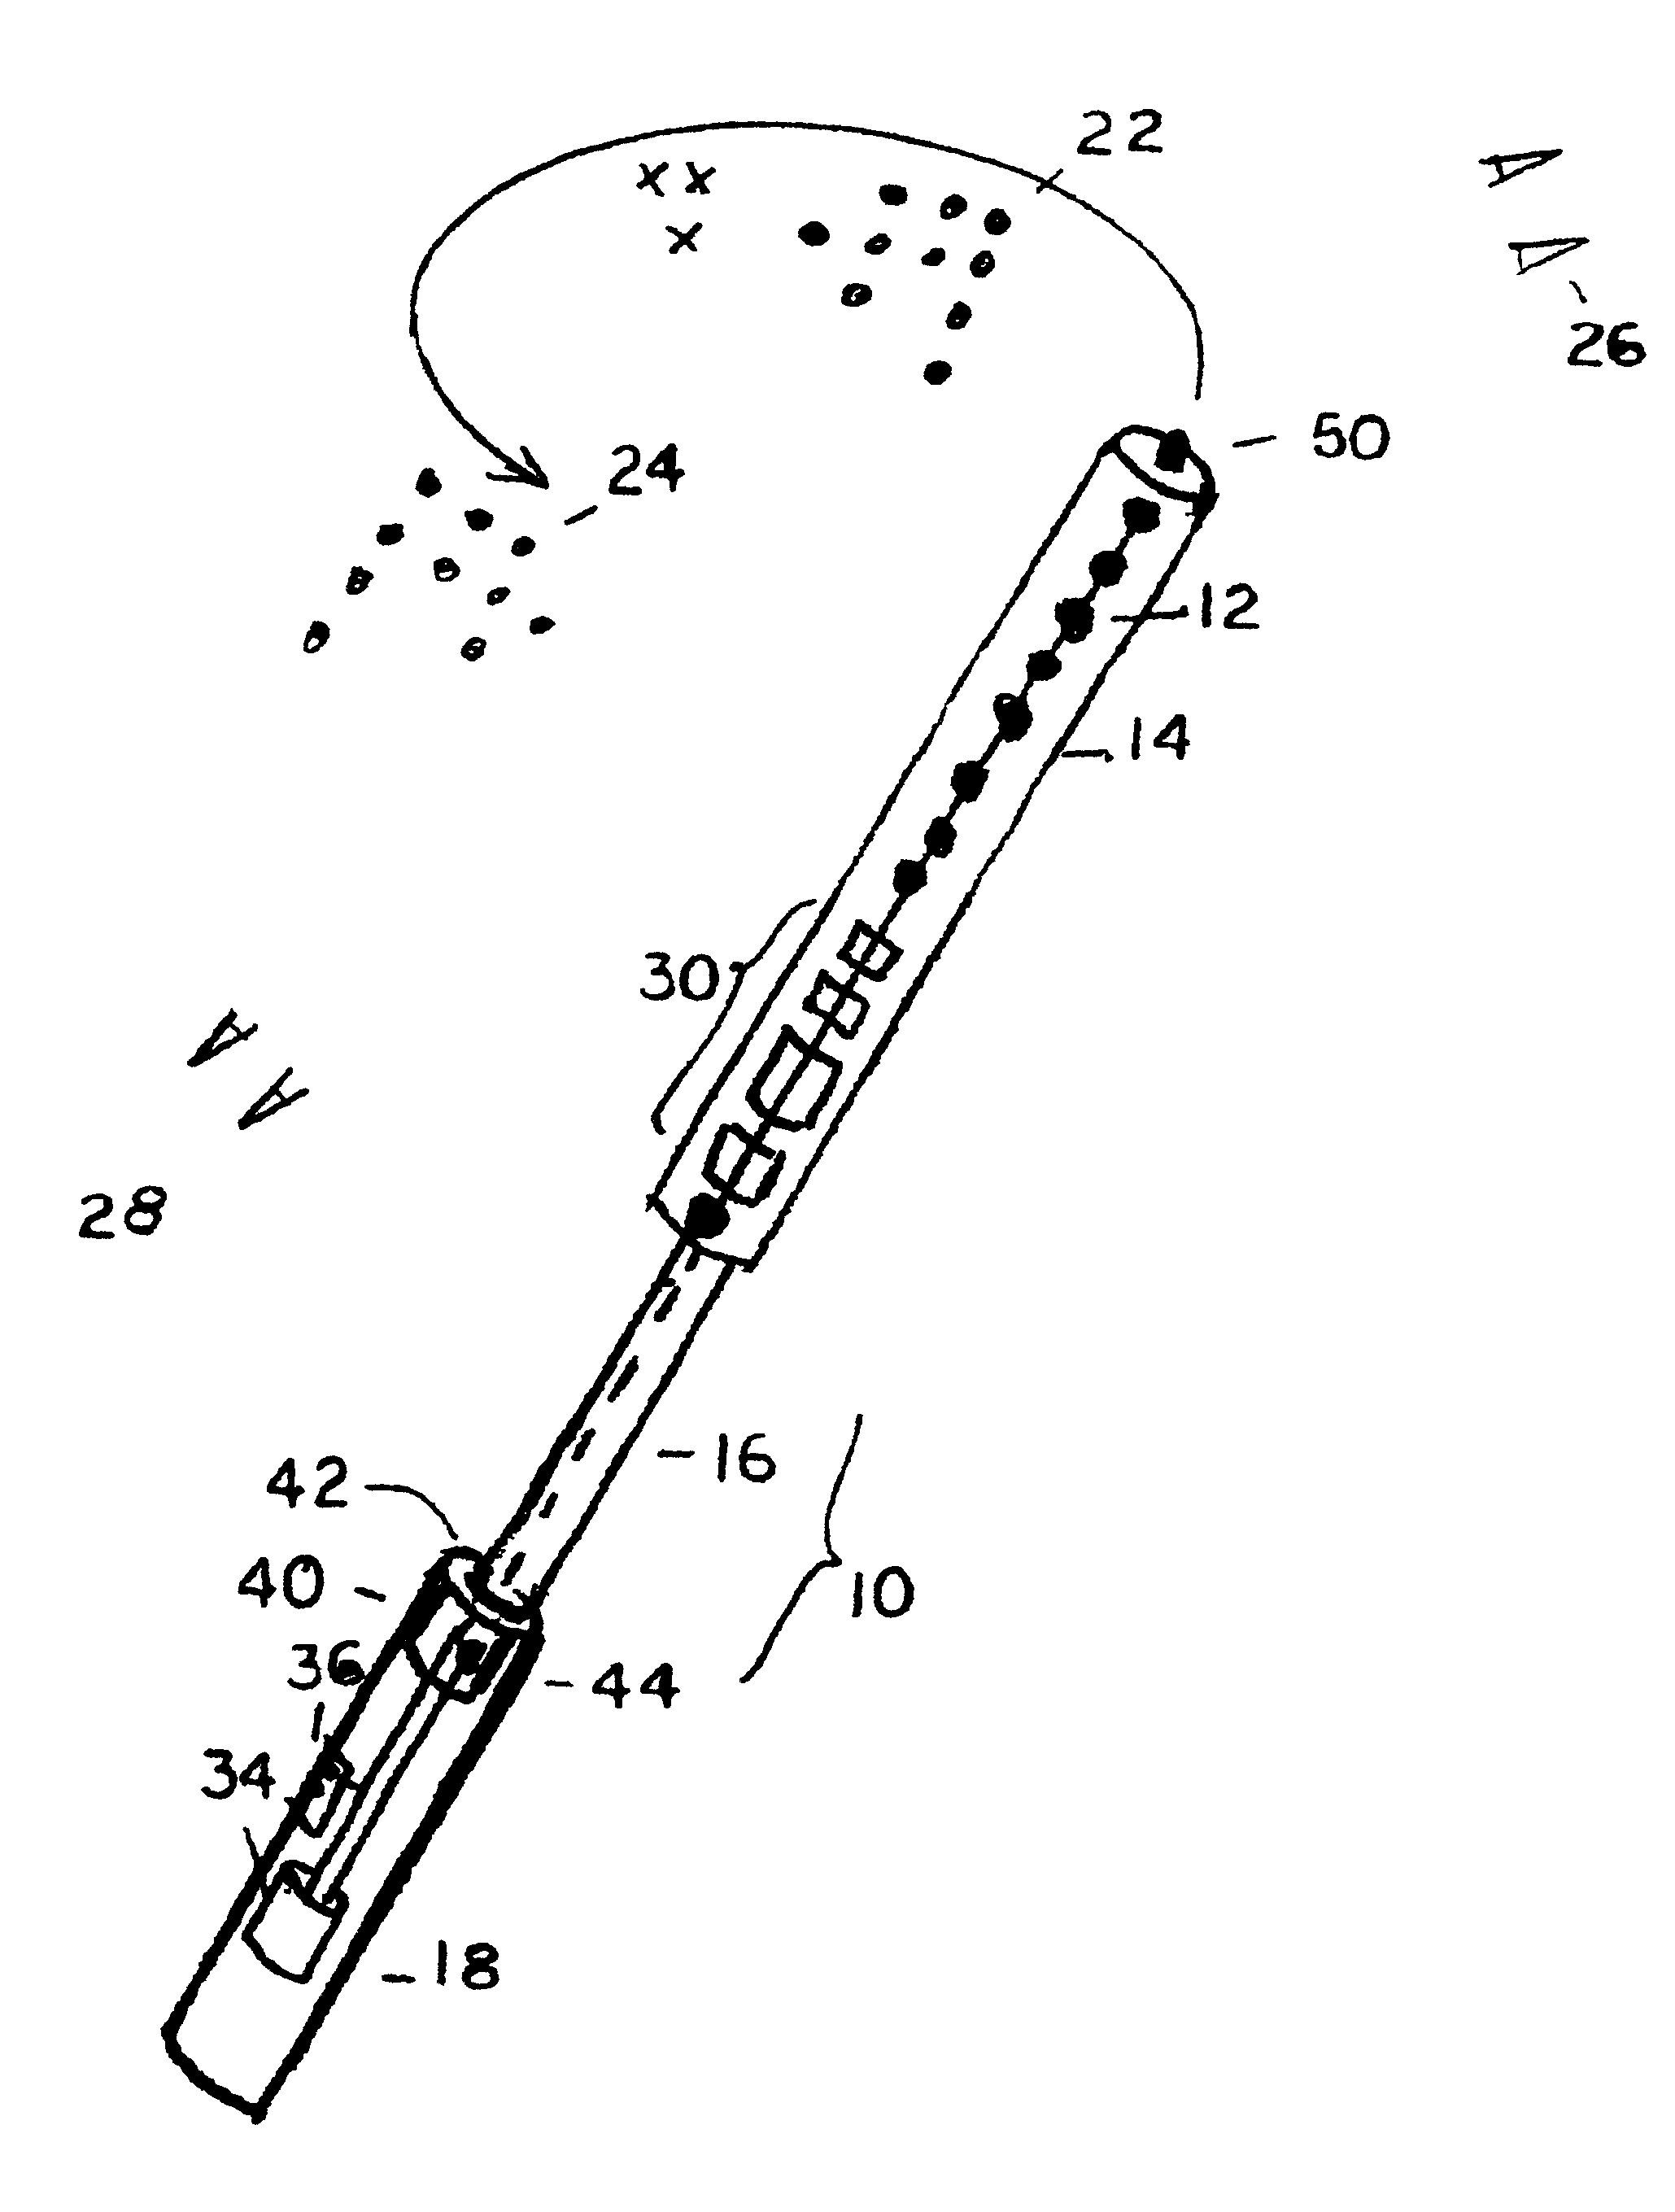 Visual special effects display device